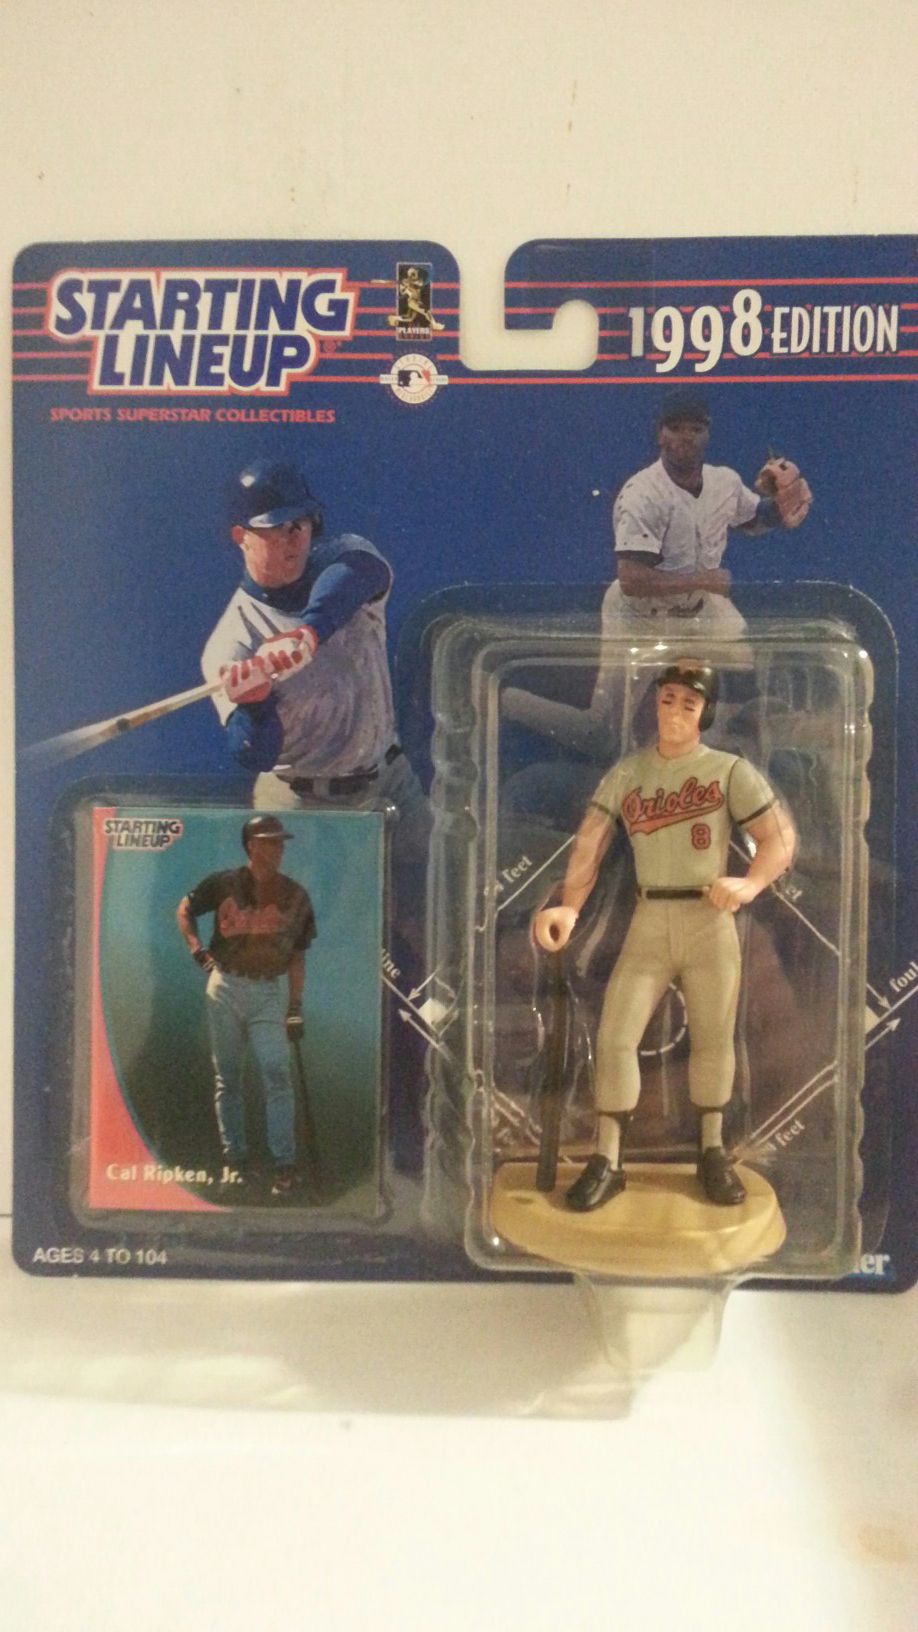 Starting Lineup Cal Ripken Jr Action Figure 1998 Edition Comes with a trading card